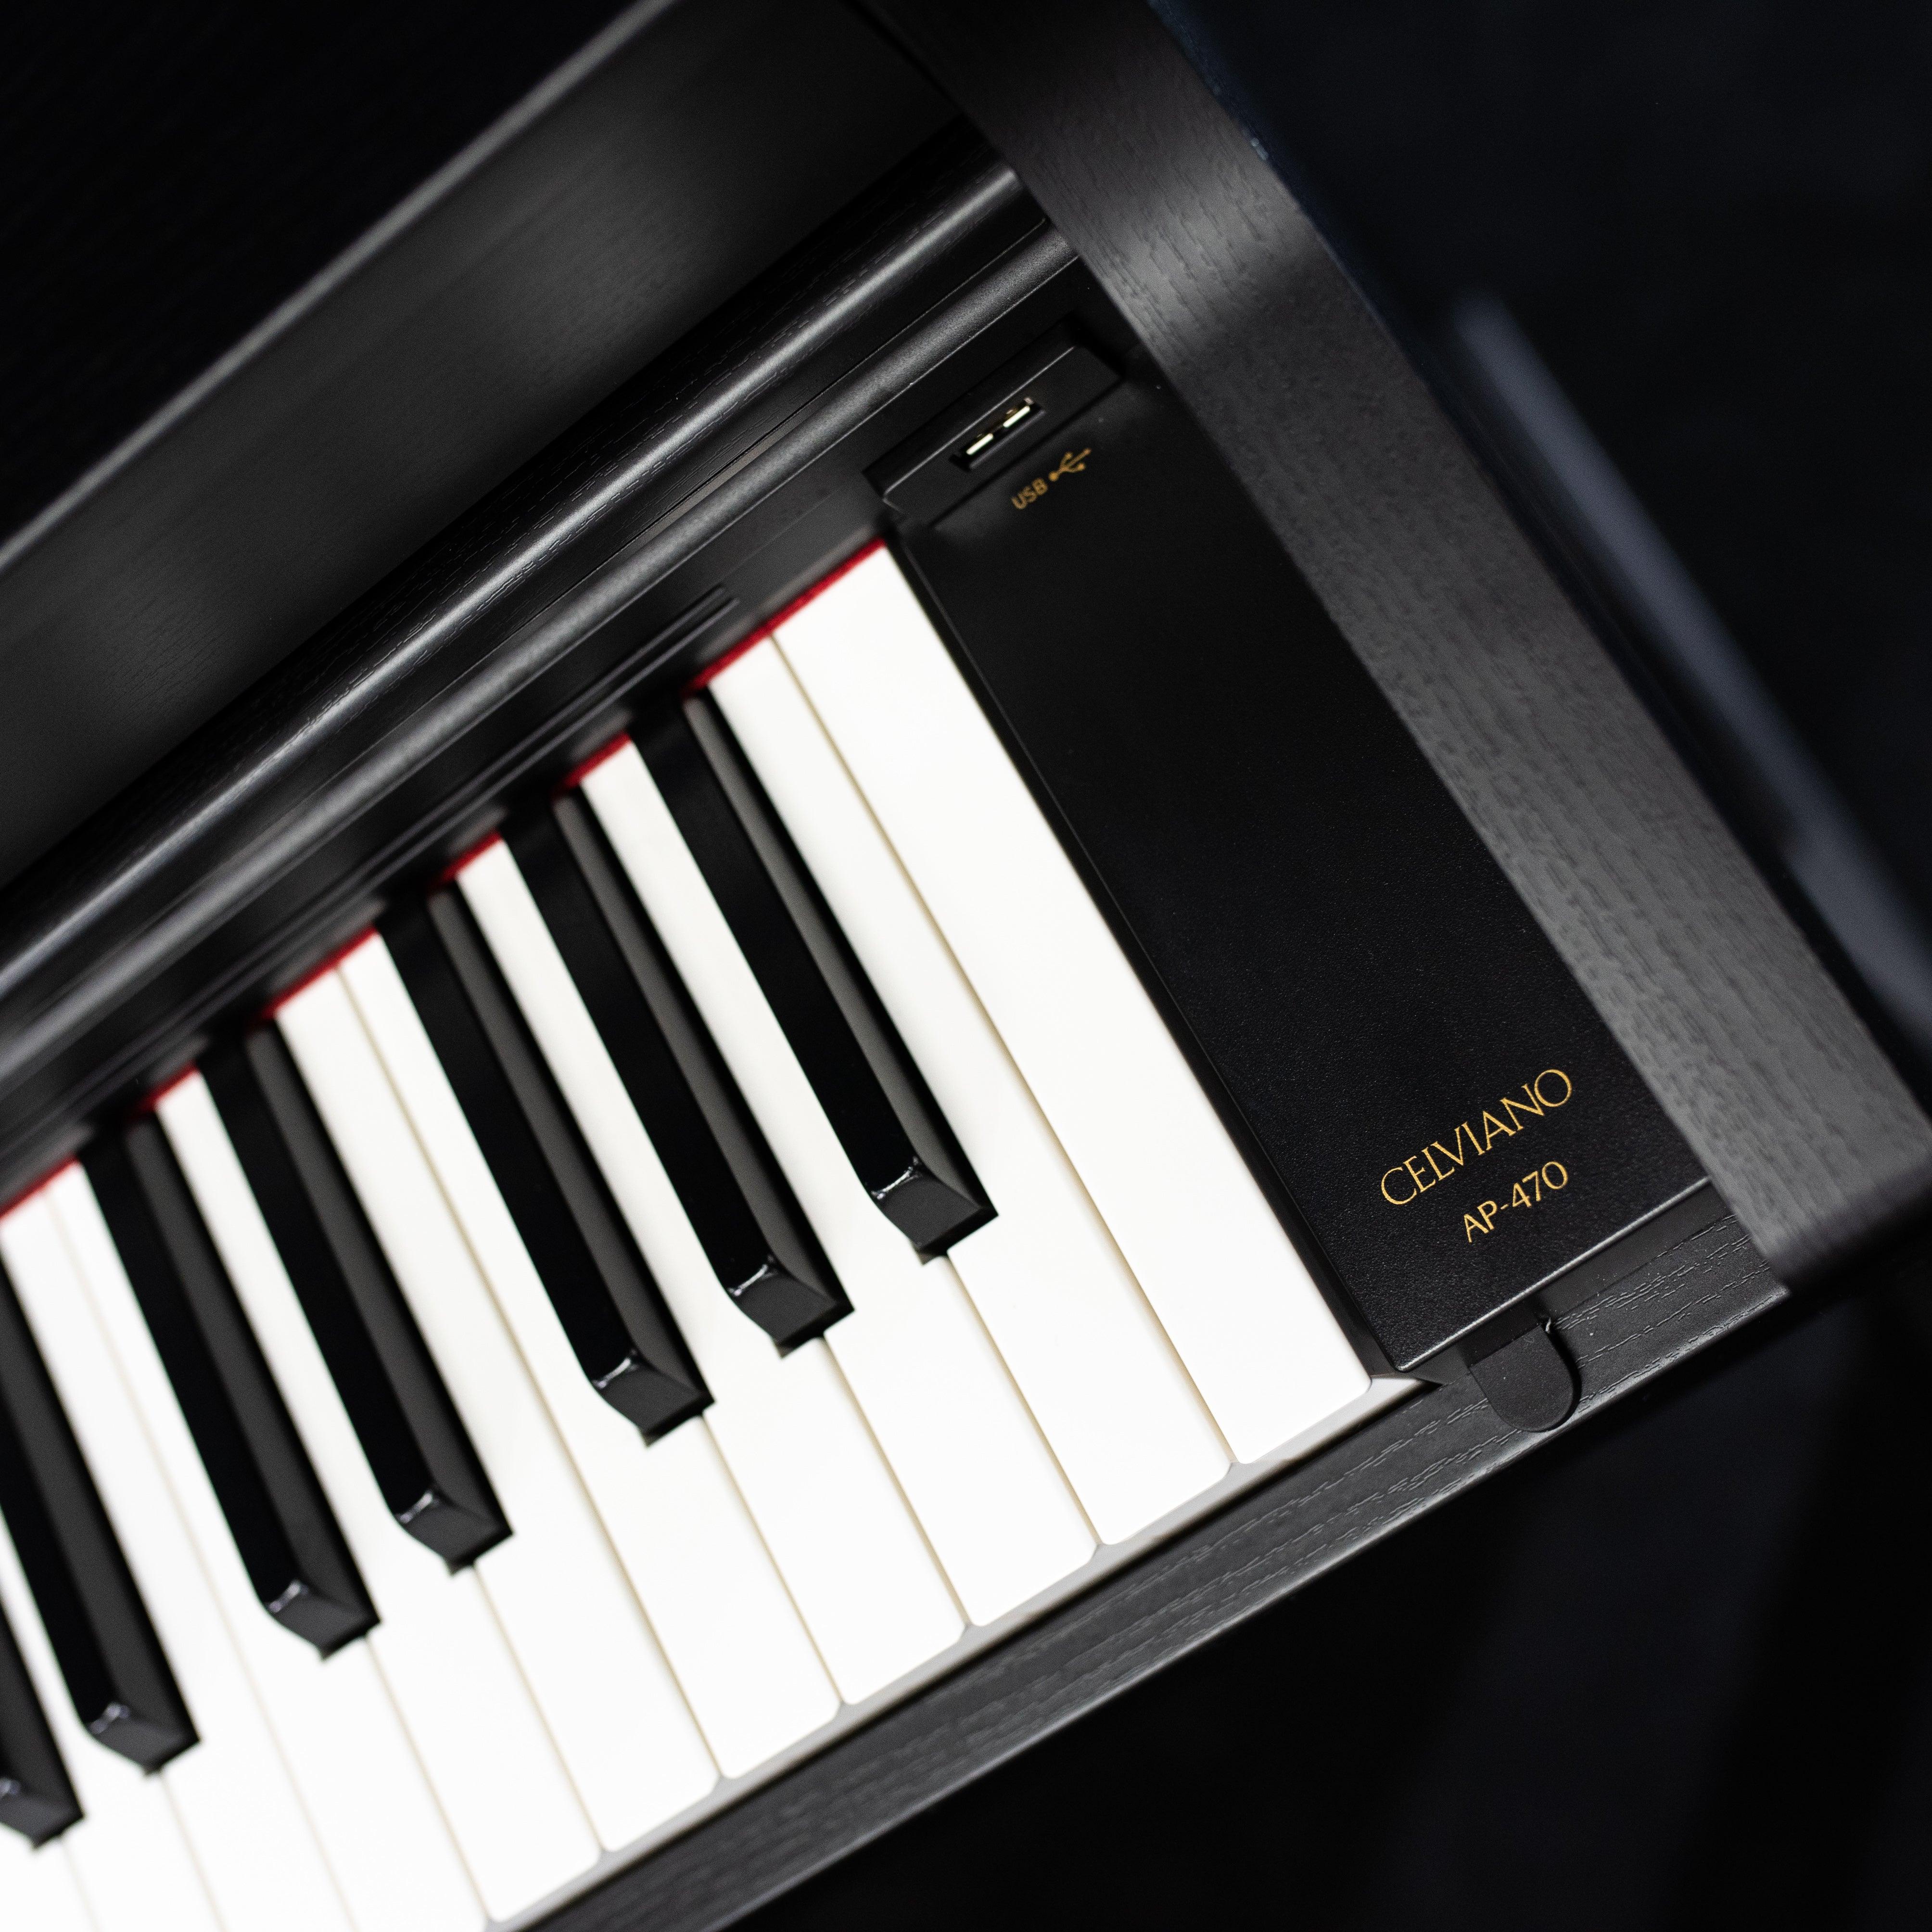 Scoring performances Chordana Play for Piano - Support - CASIO